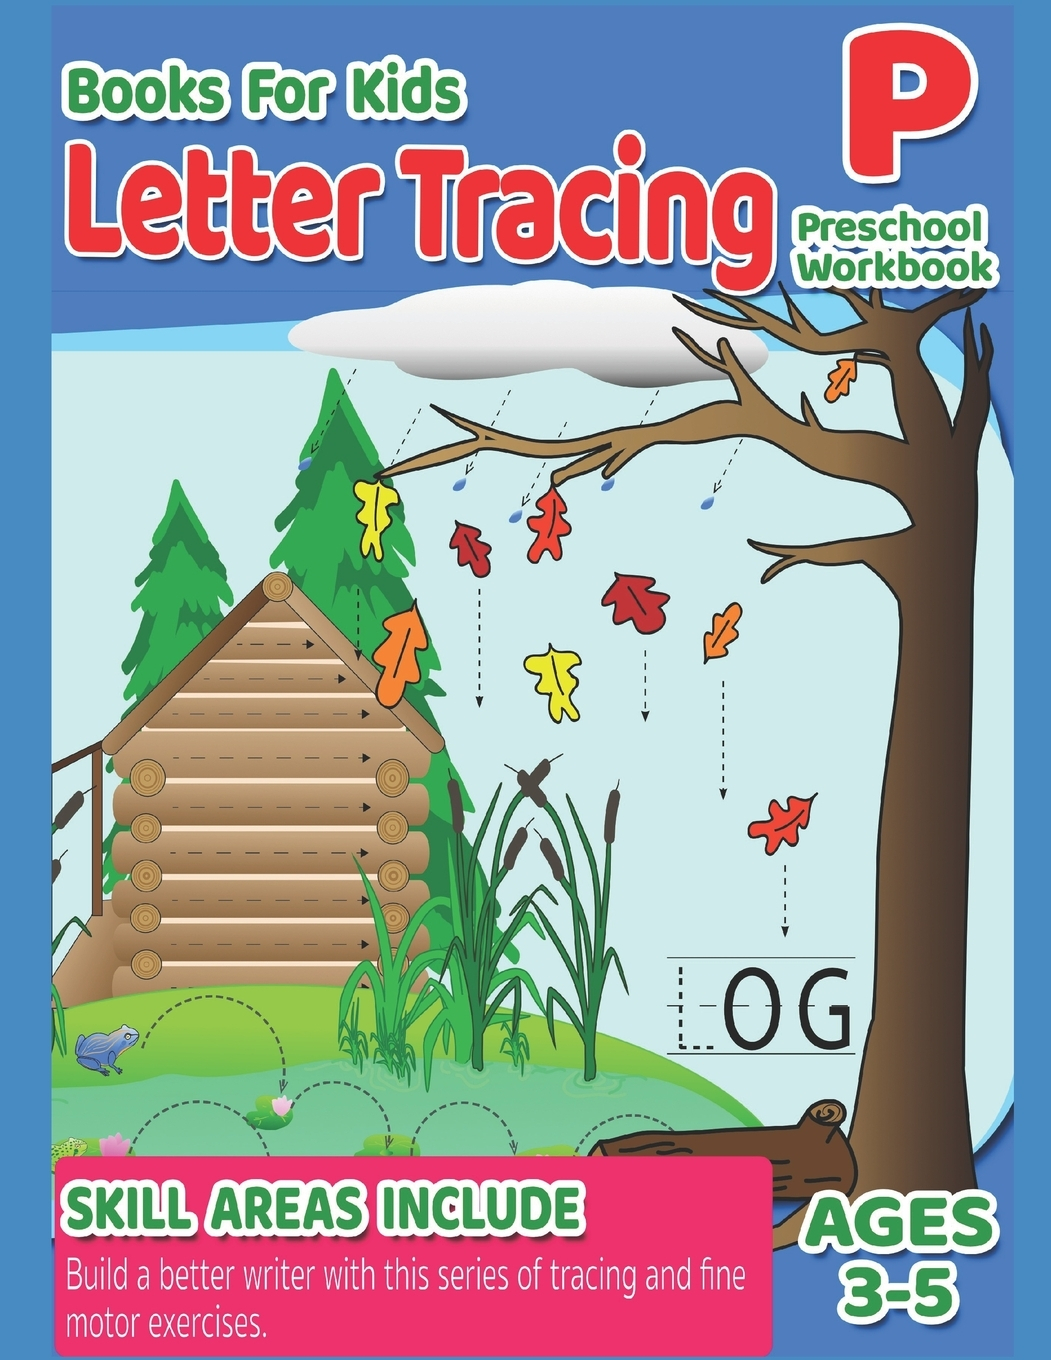 Preschool Workbook: Preschool Workbook - Letter Tracing Books For Kids Ages  3-5: Tracing Lines, Tacing Skills, Tracing Abc, Colors, Shapes, Numbers